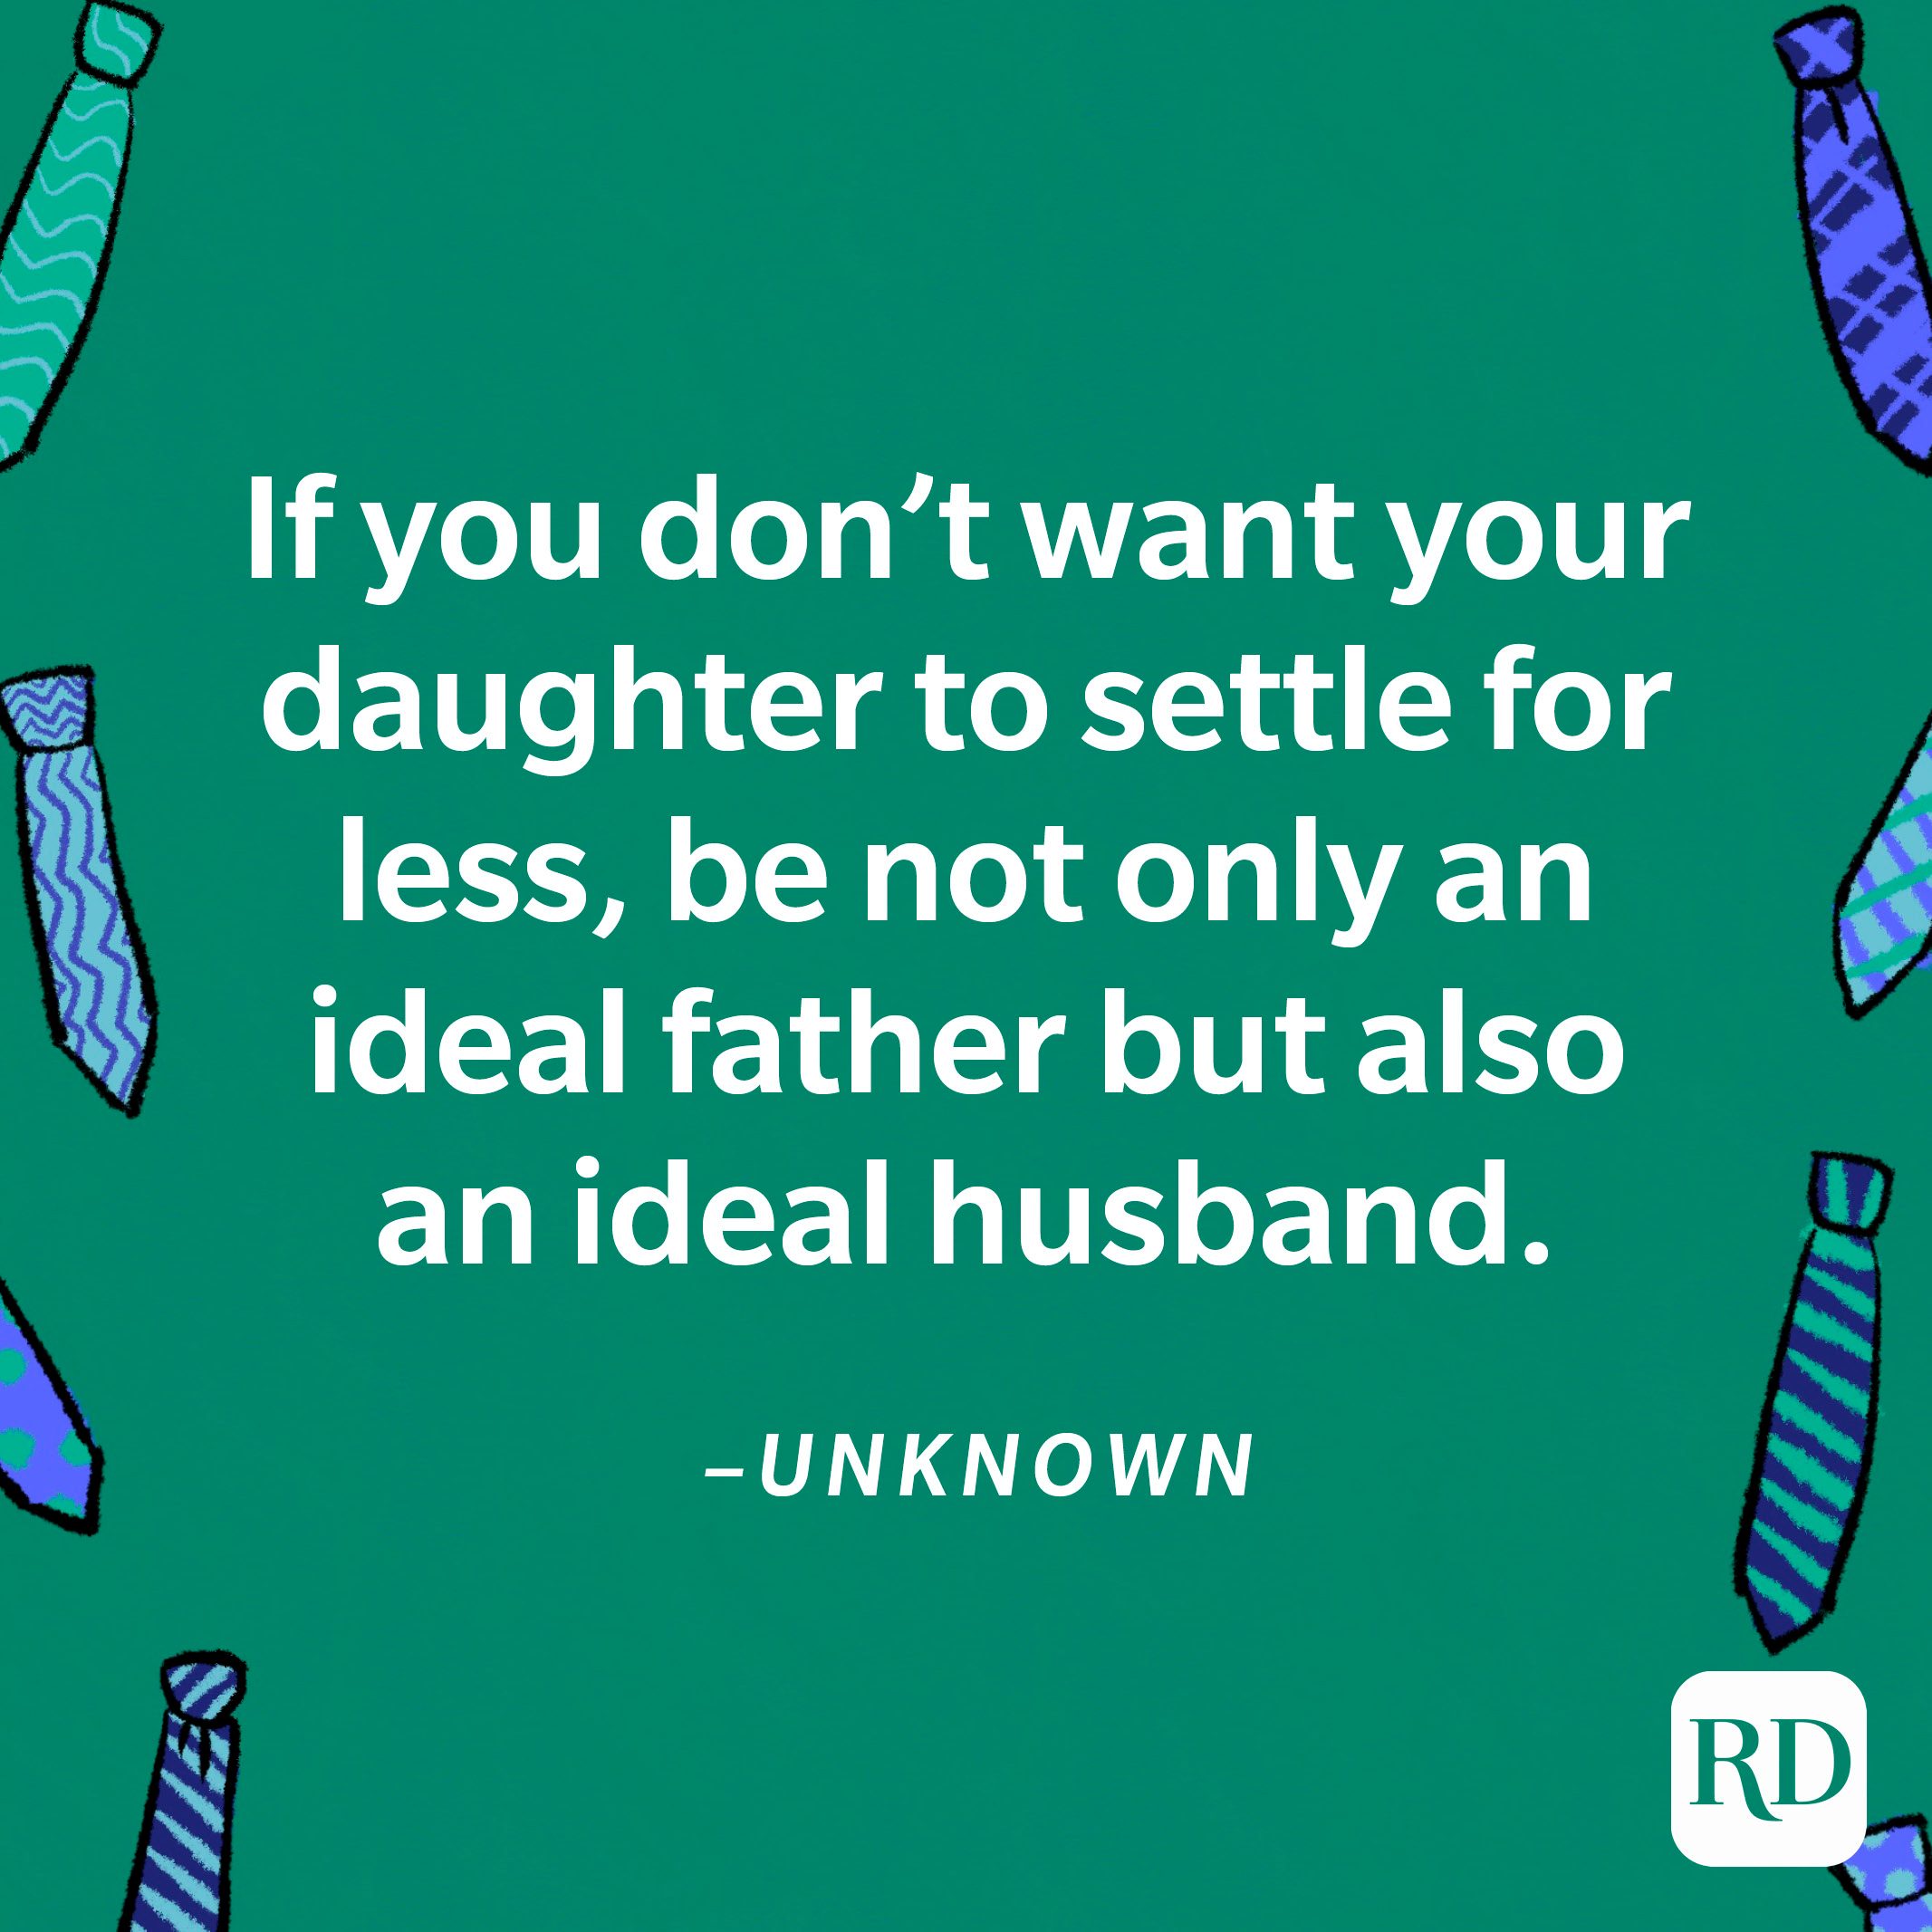 “If you don’t want your daughter to settle for less, be not only an ideal father but also an ideal husband.”—Unknown 21